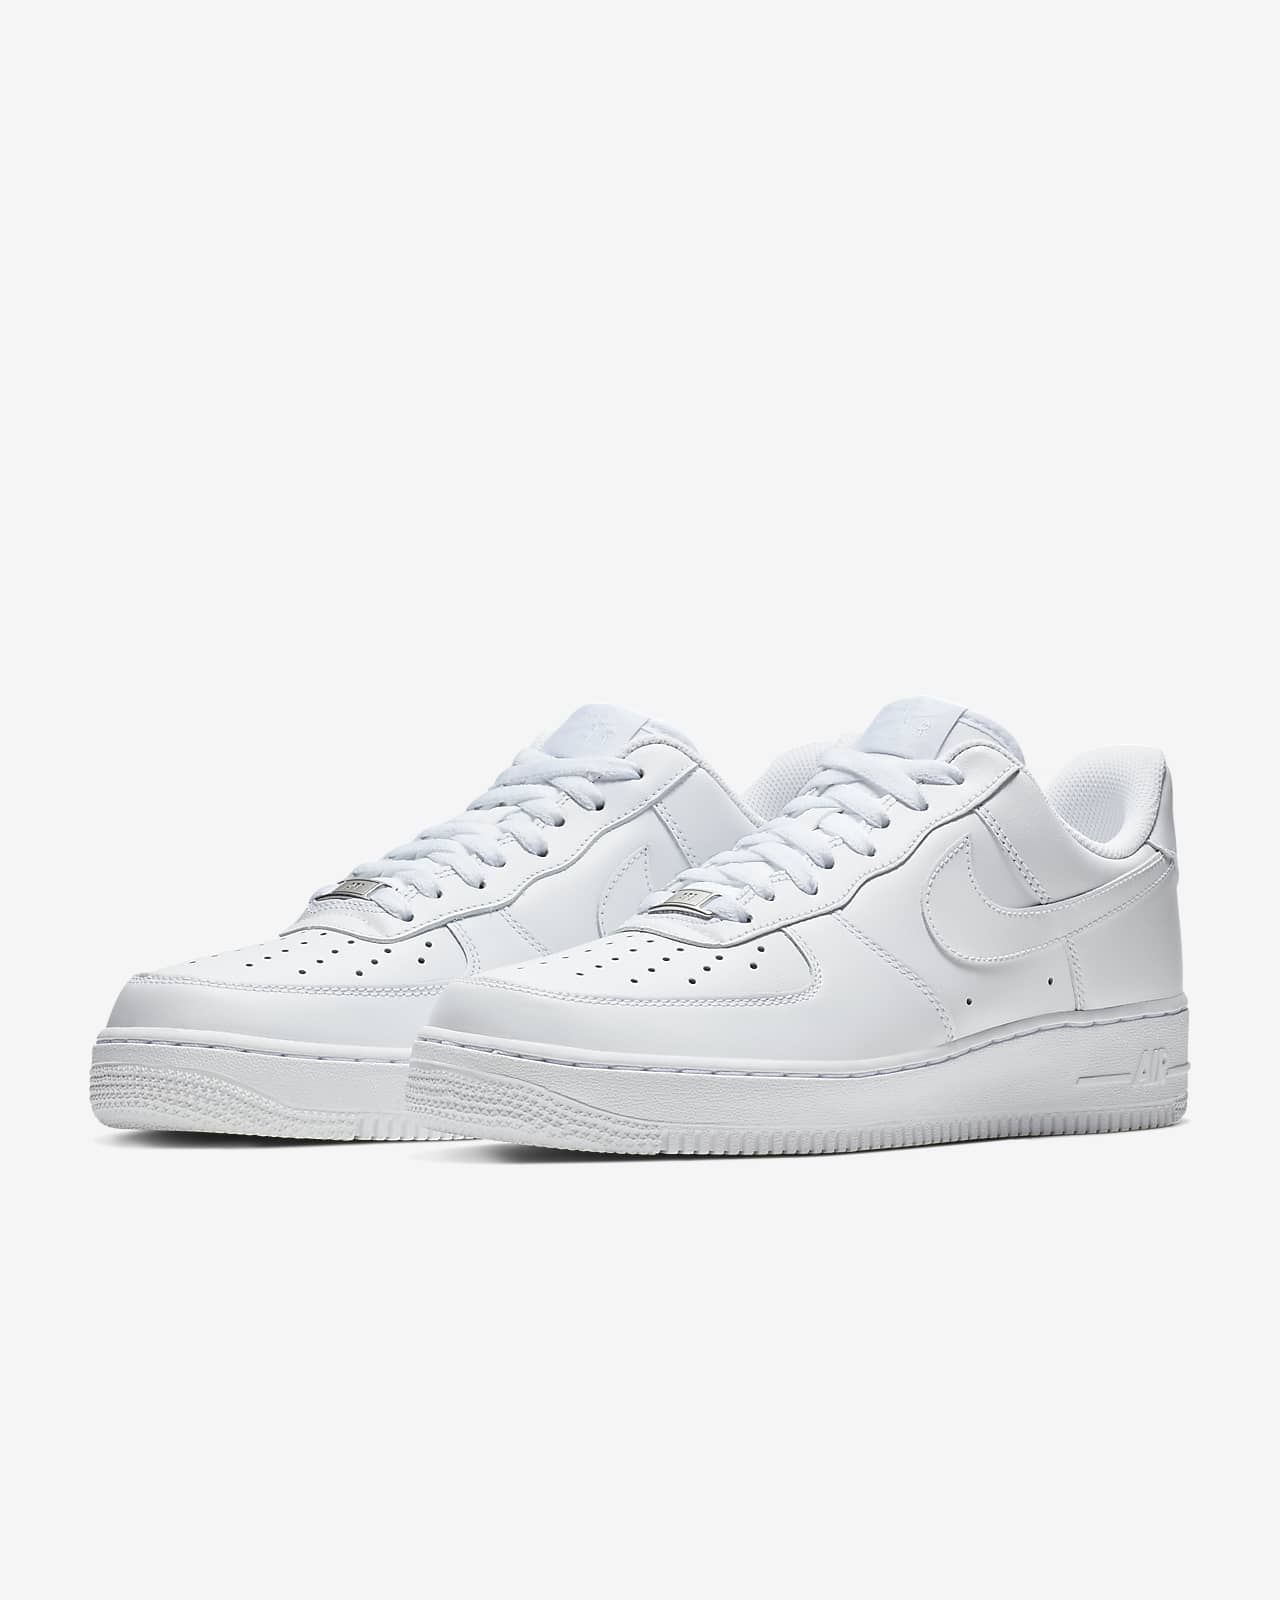 nike air force one size 6.5